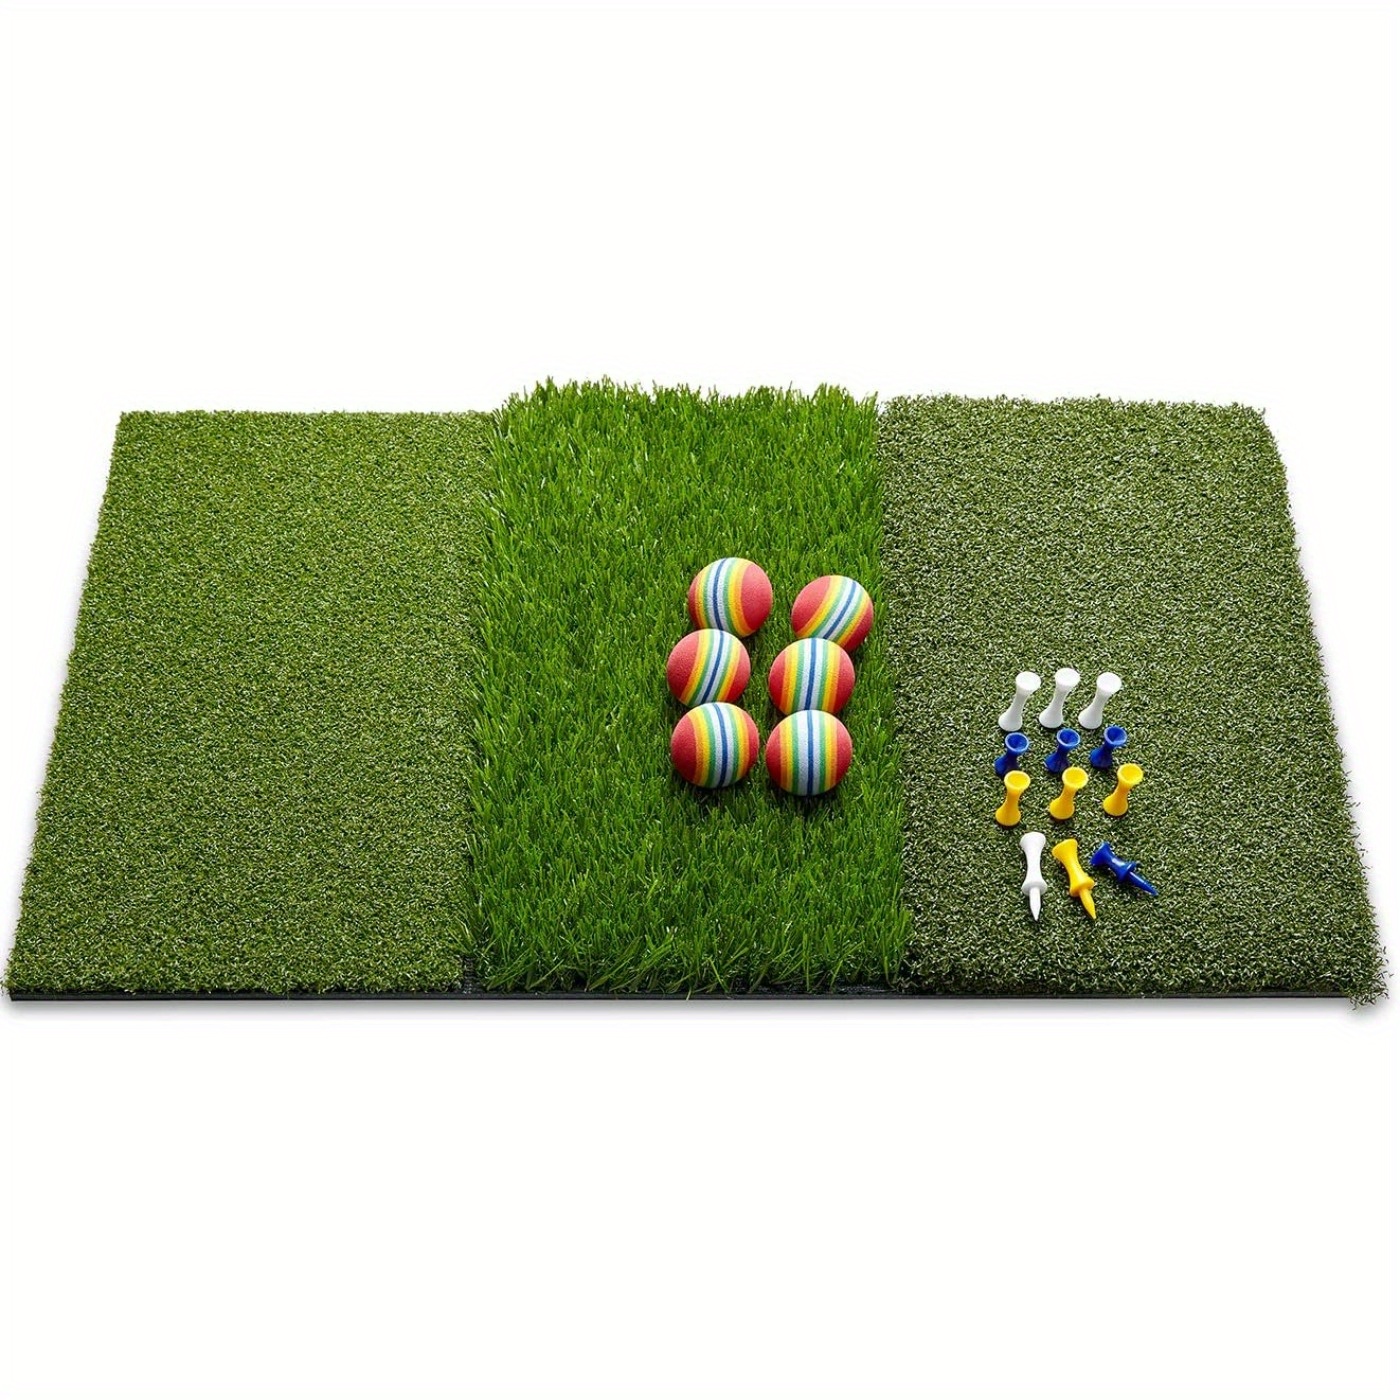 

Golf Mat Chipping Hitting 25" X16" 3in1 Foldable - Practice Turf Backyard Or Indoor Portable Premium Quality Realistic Multi Length Grass + 12 Extra Tees